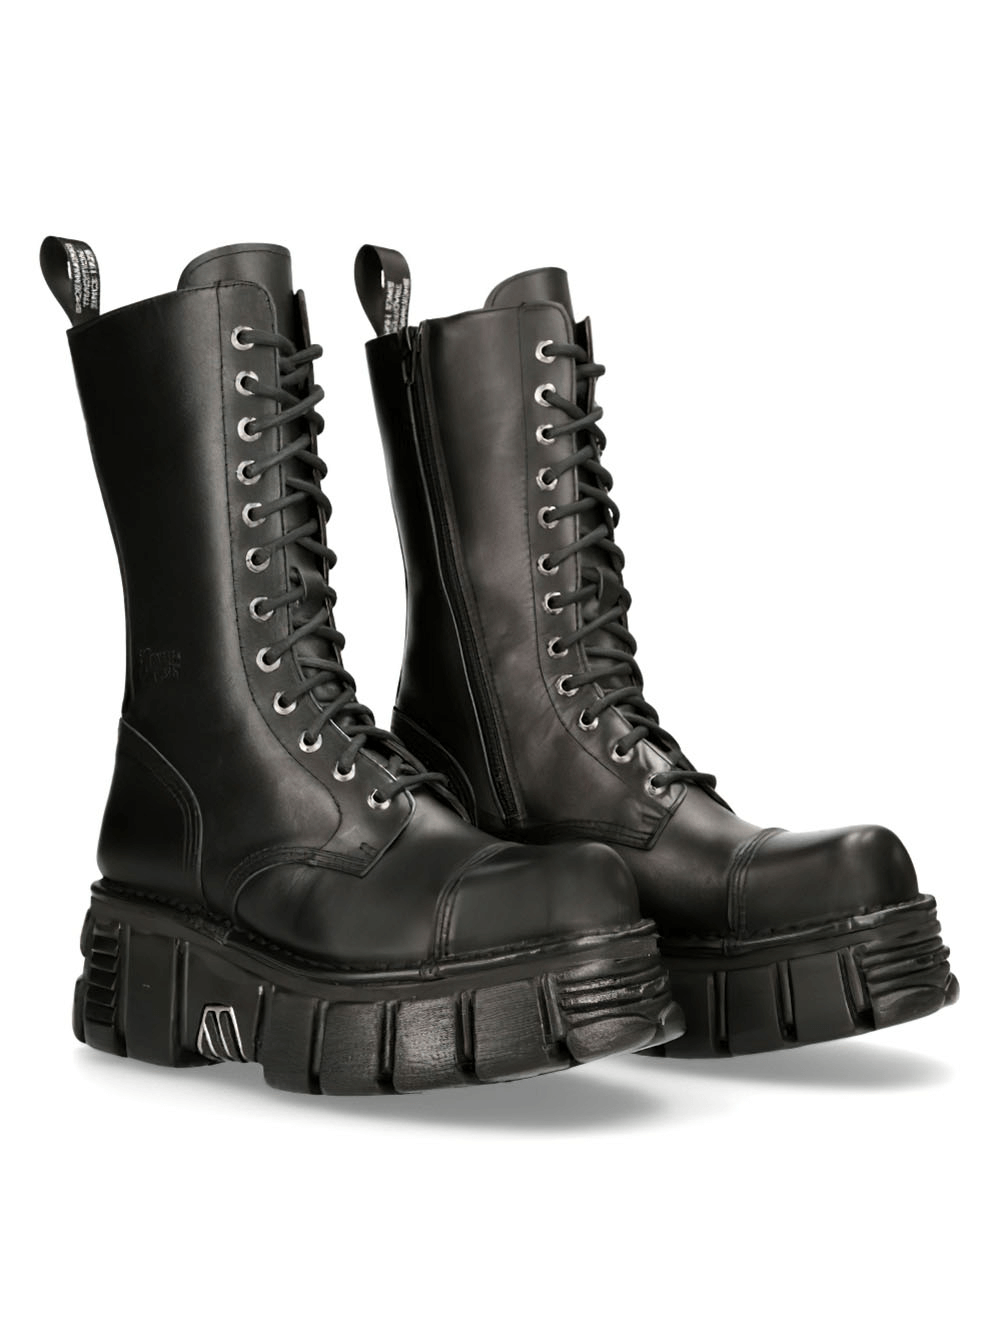 NEW ROCK Leather Military High Boots with Metallic Details